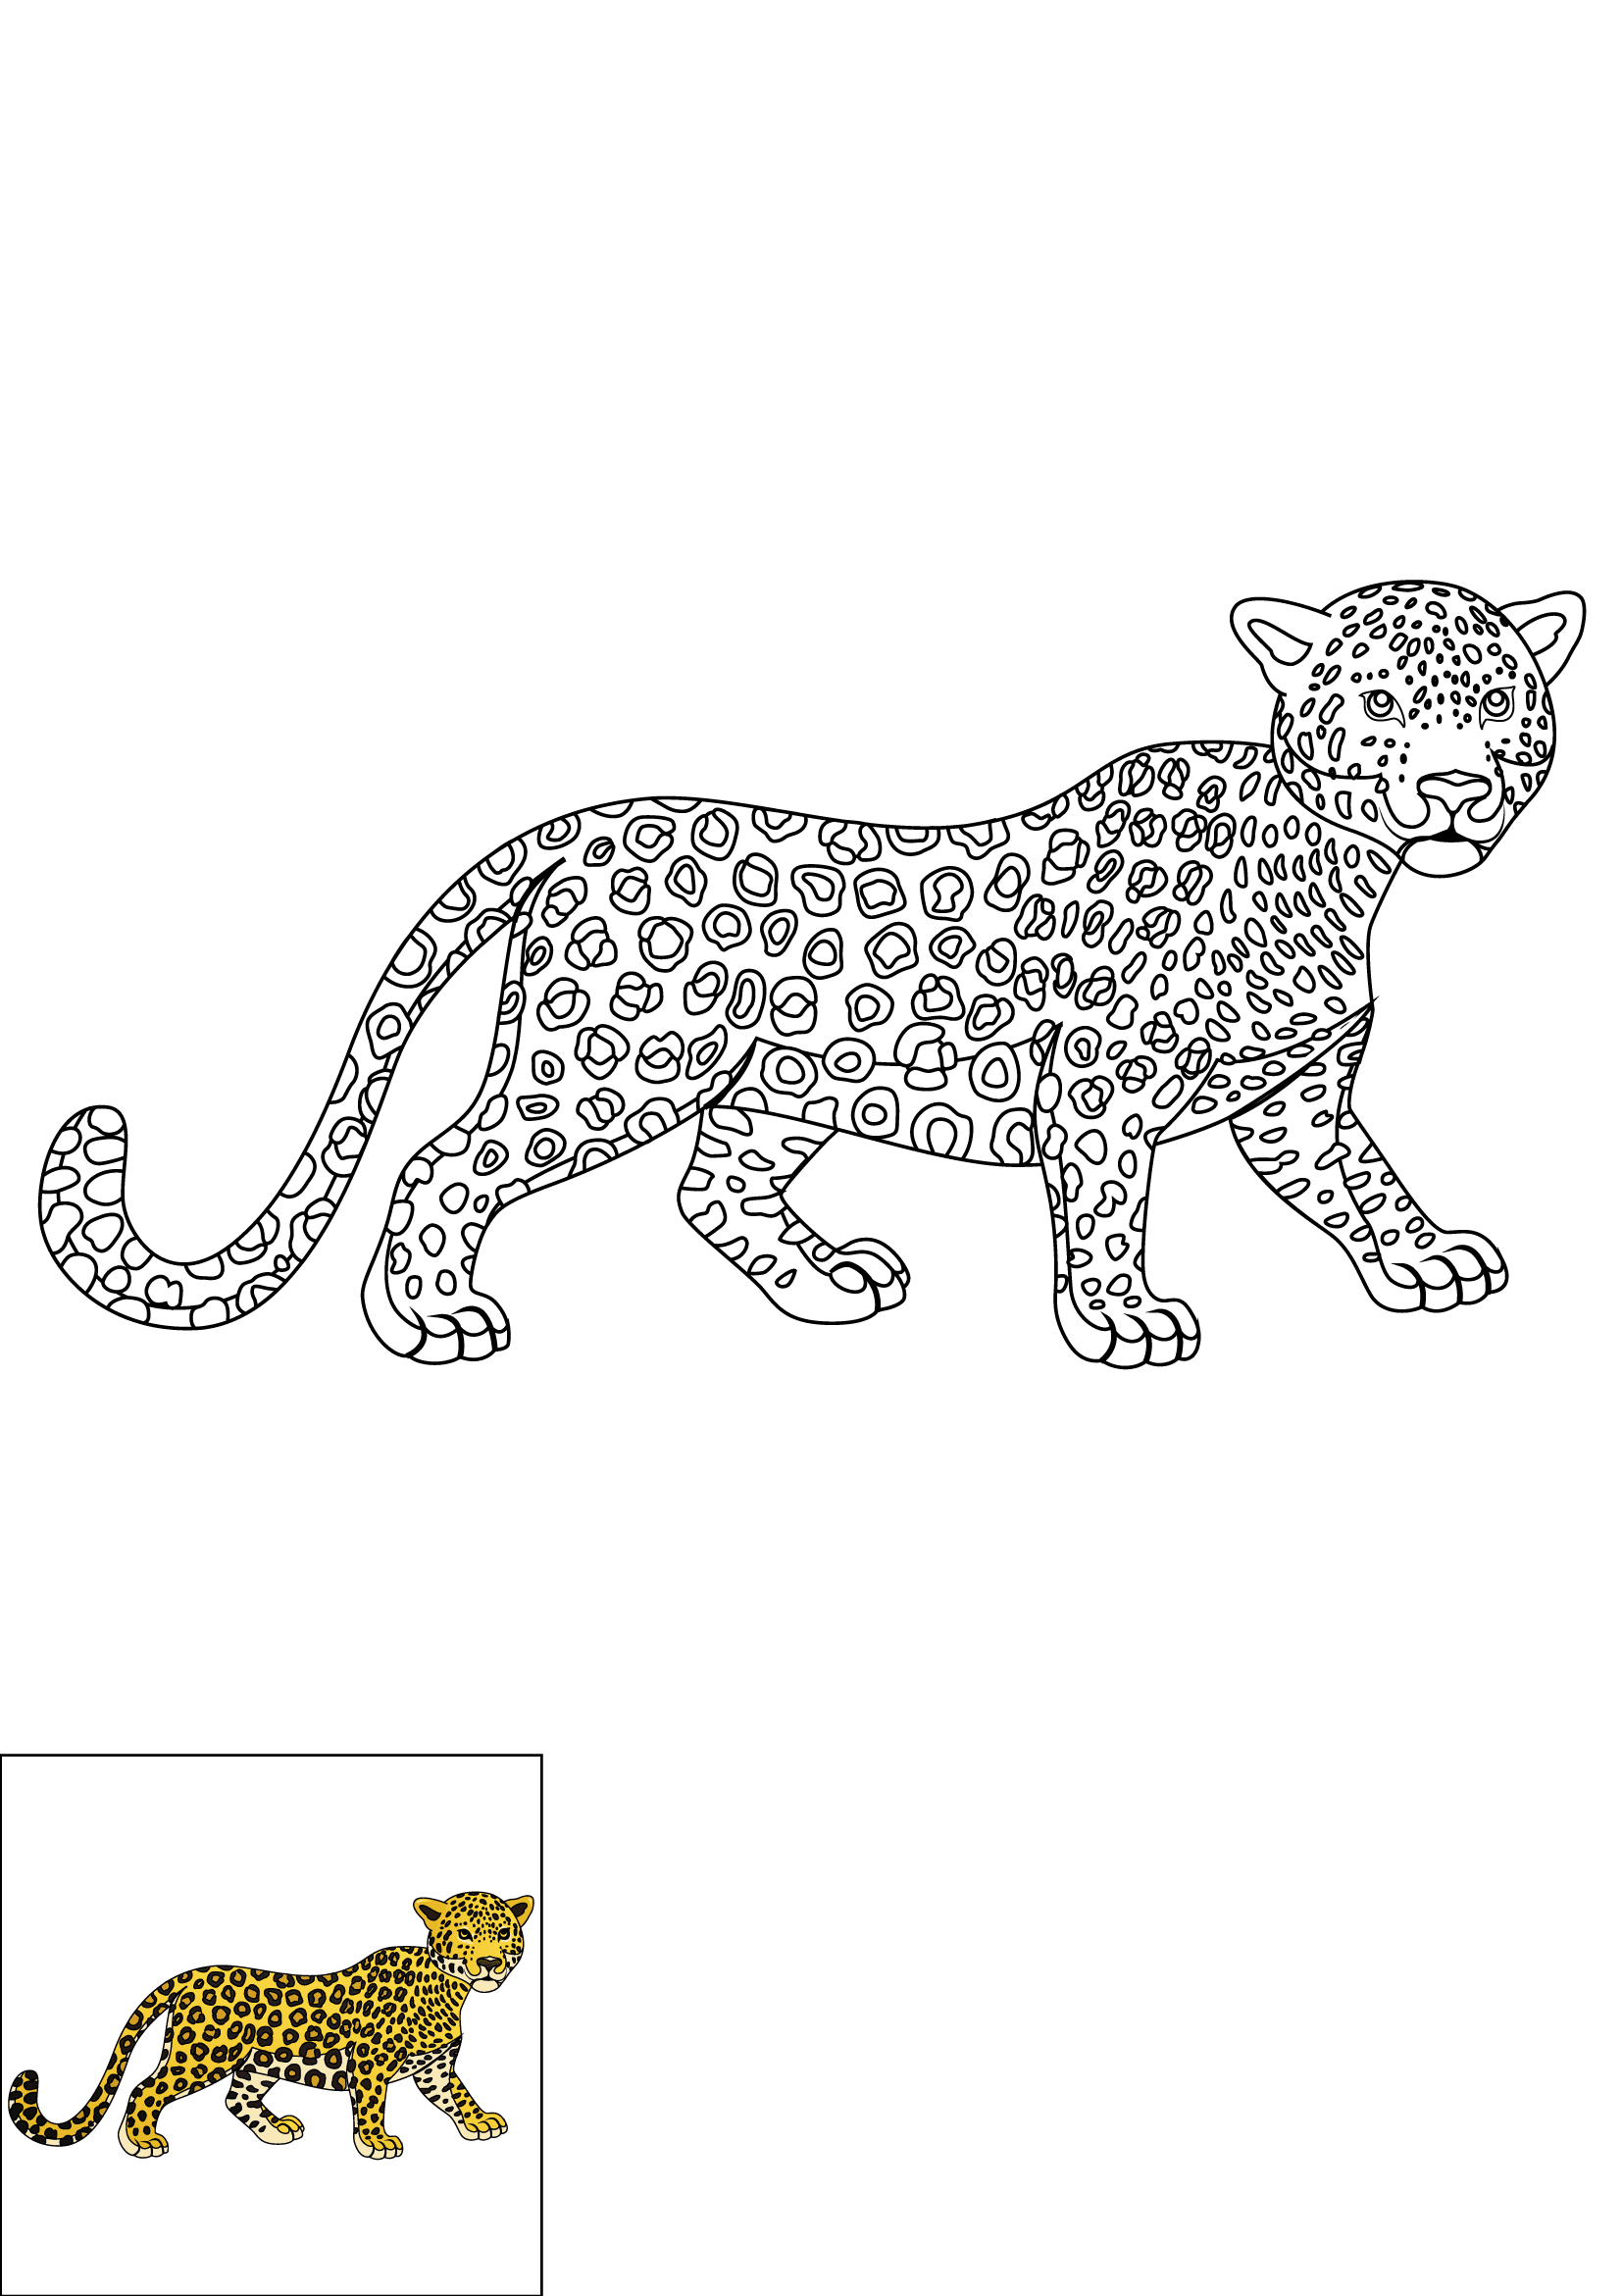 How to Draw A Leopard Step by Step Printable Color